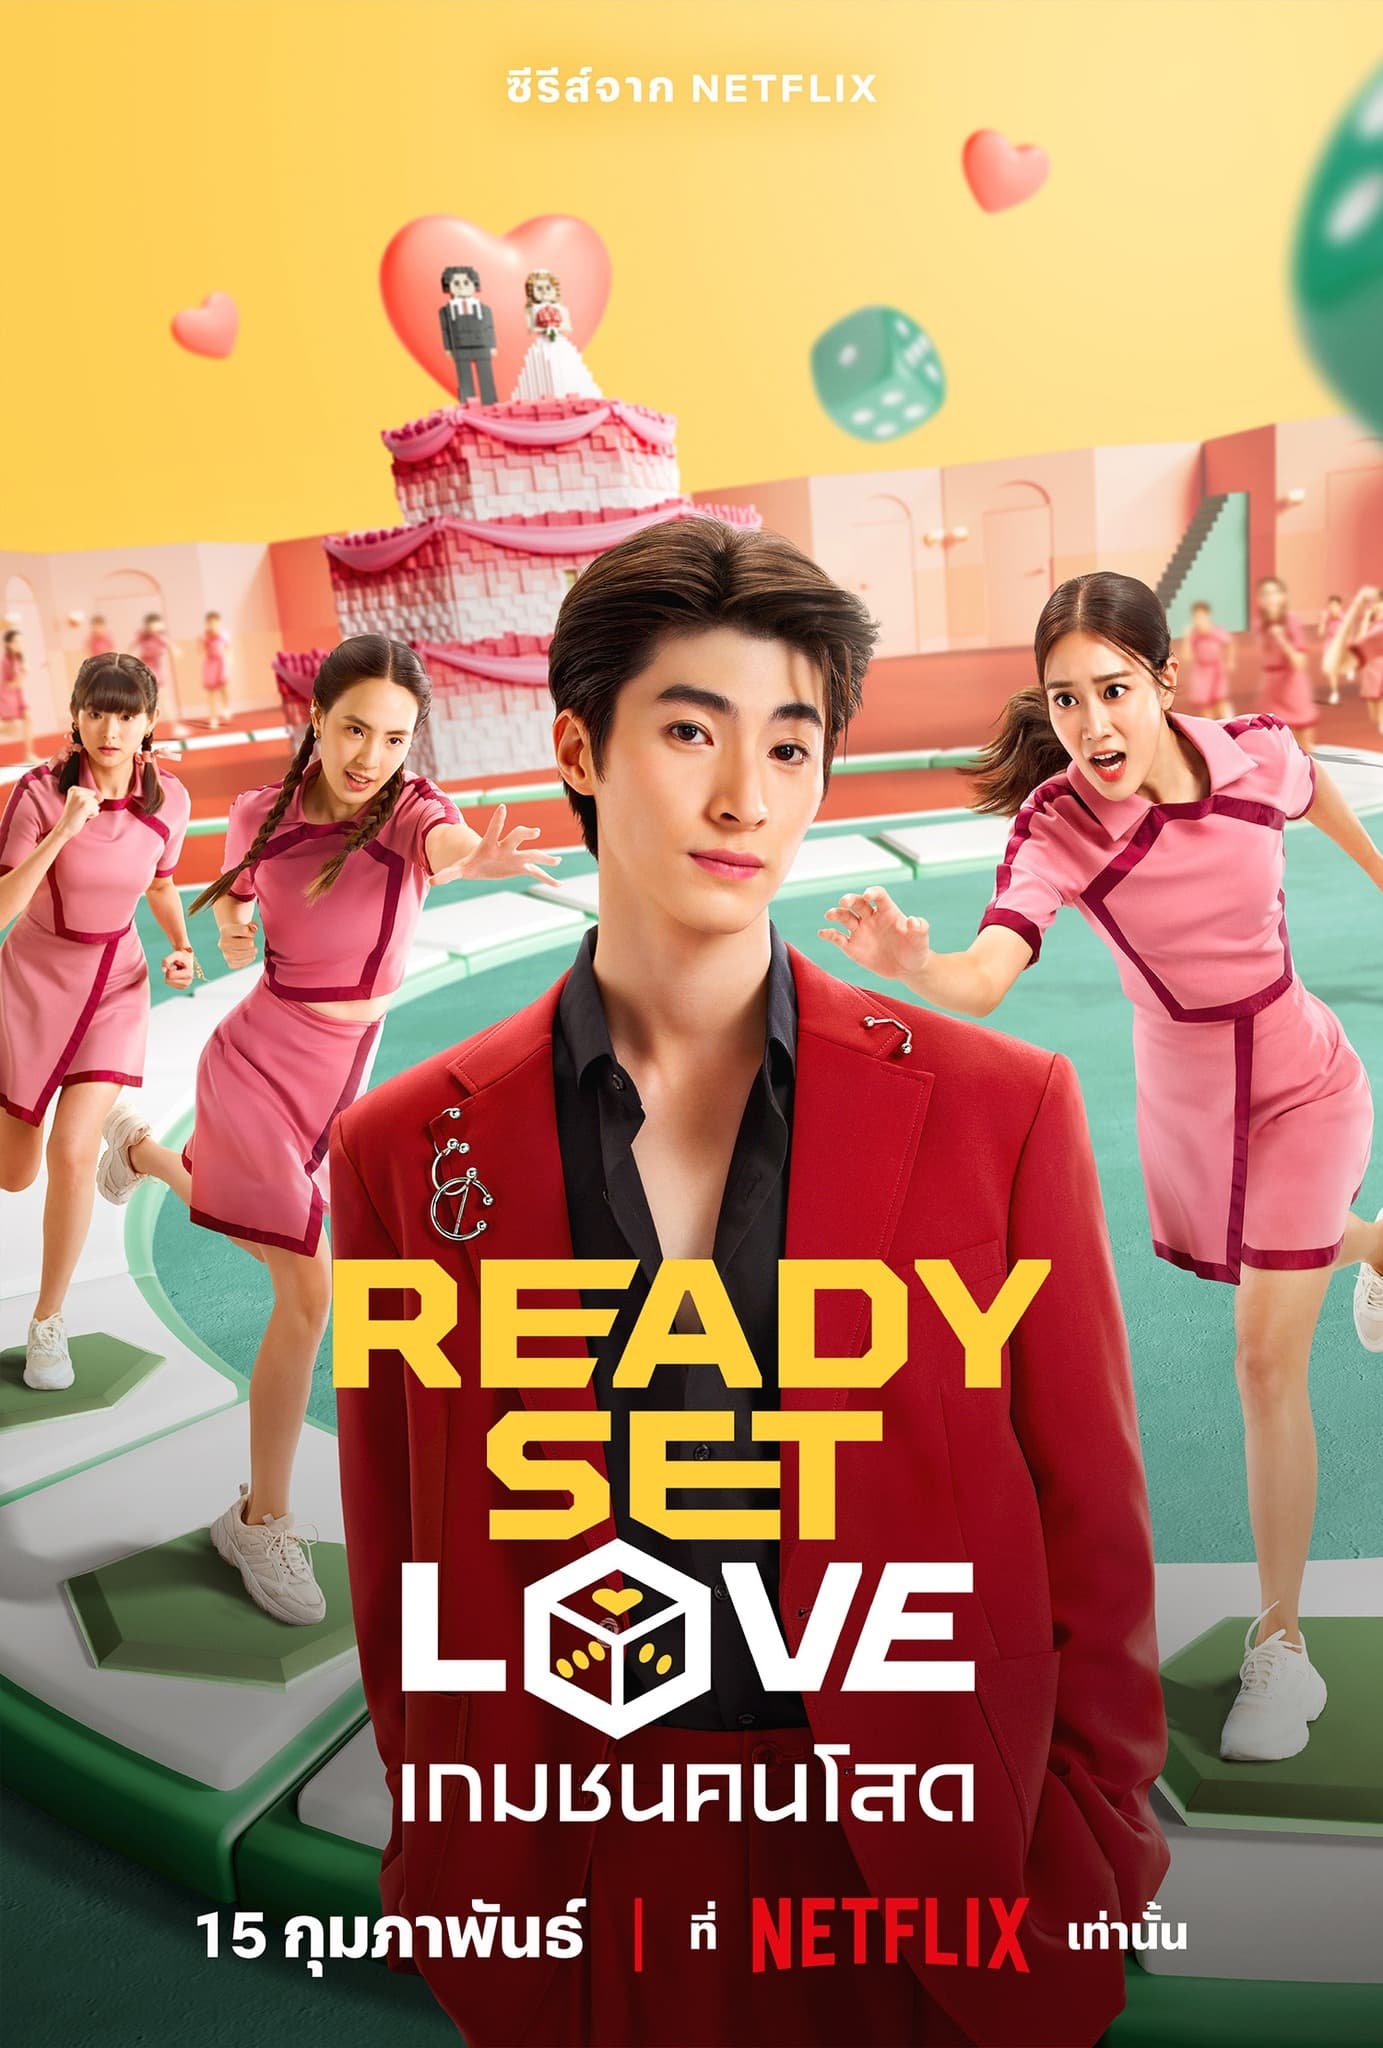 TV ratings for Ready, Set, Love (เกมชนคนโสด) in the United States. Netflix TV series